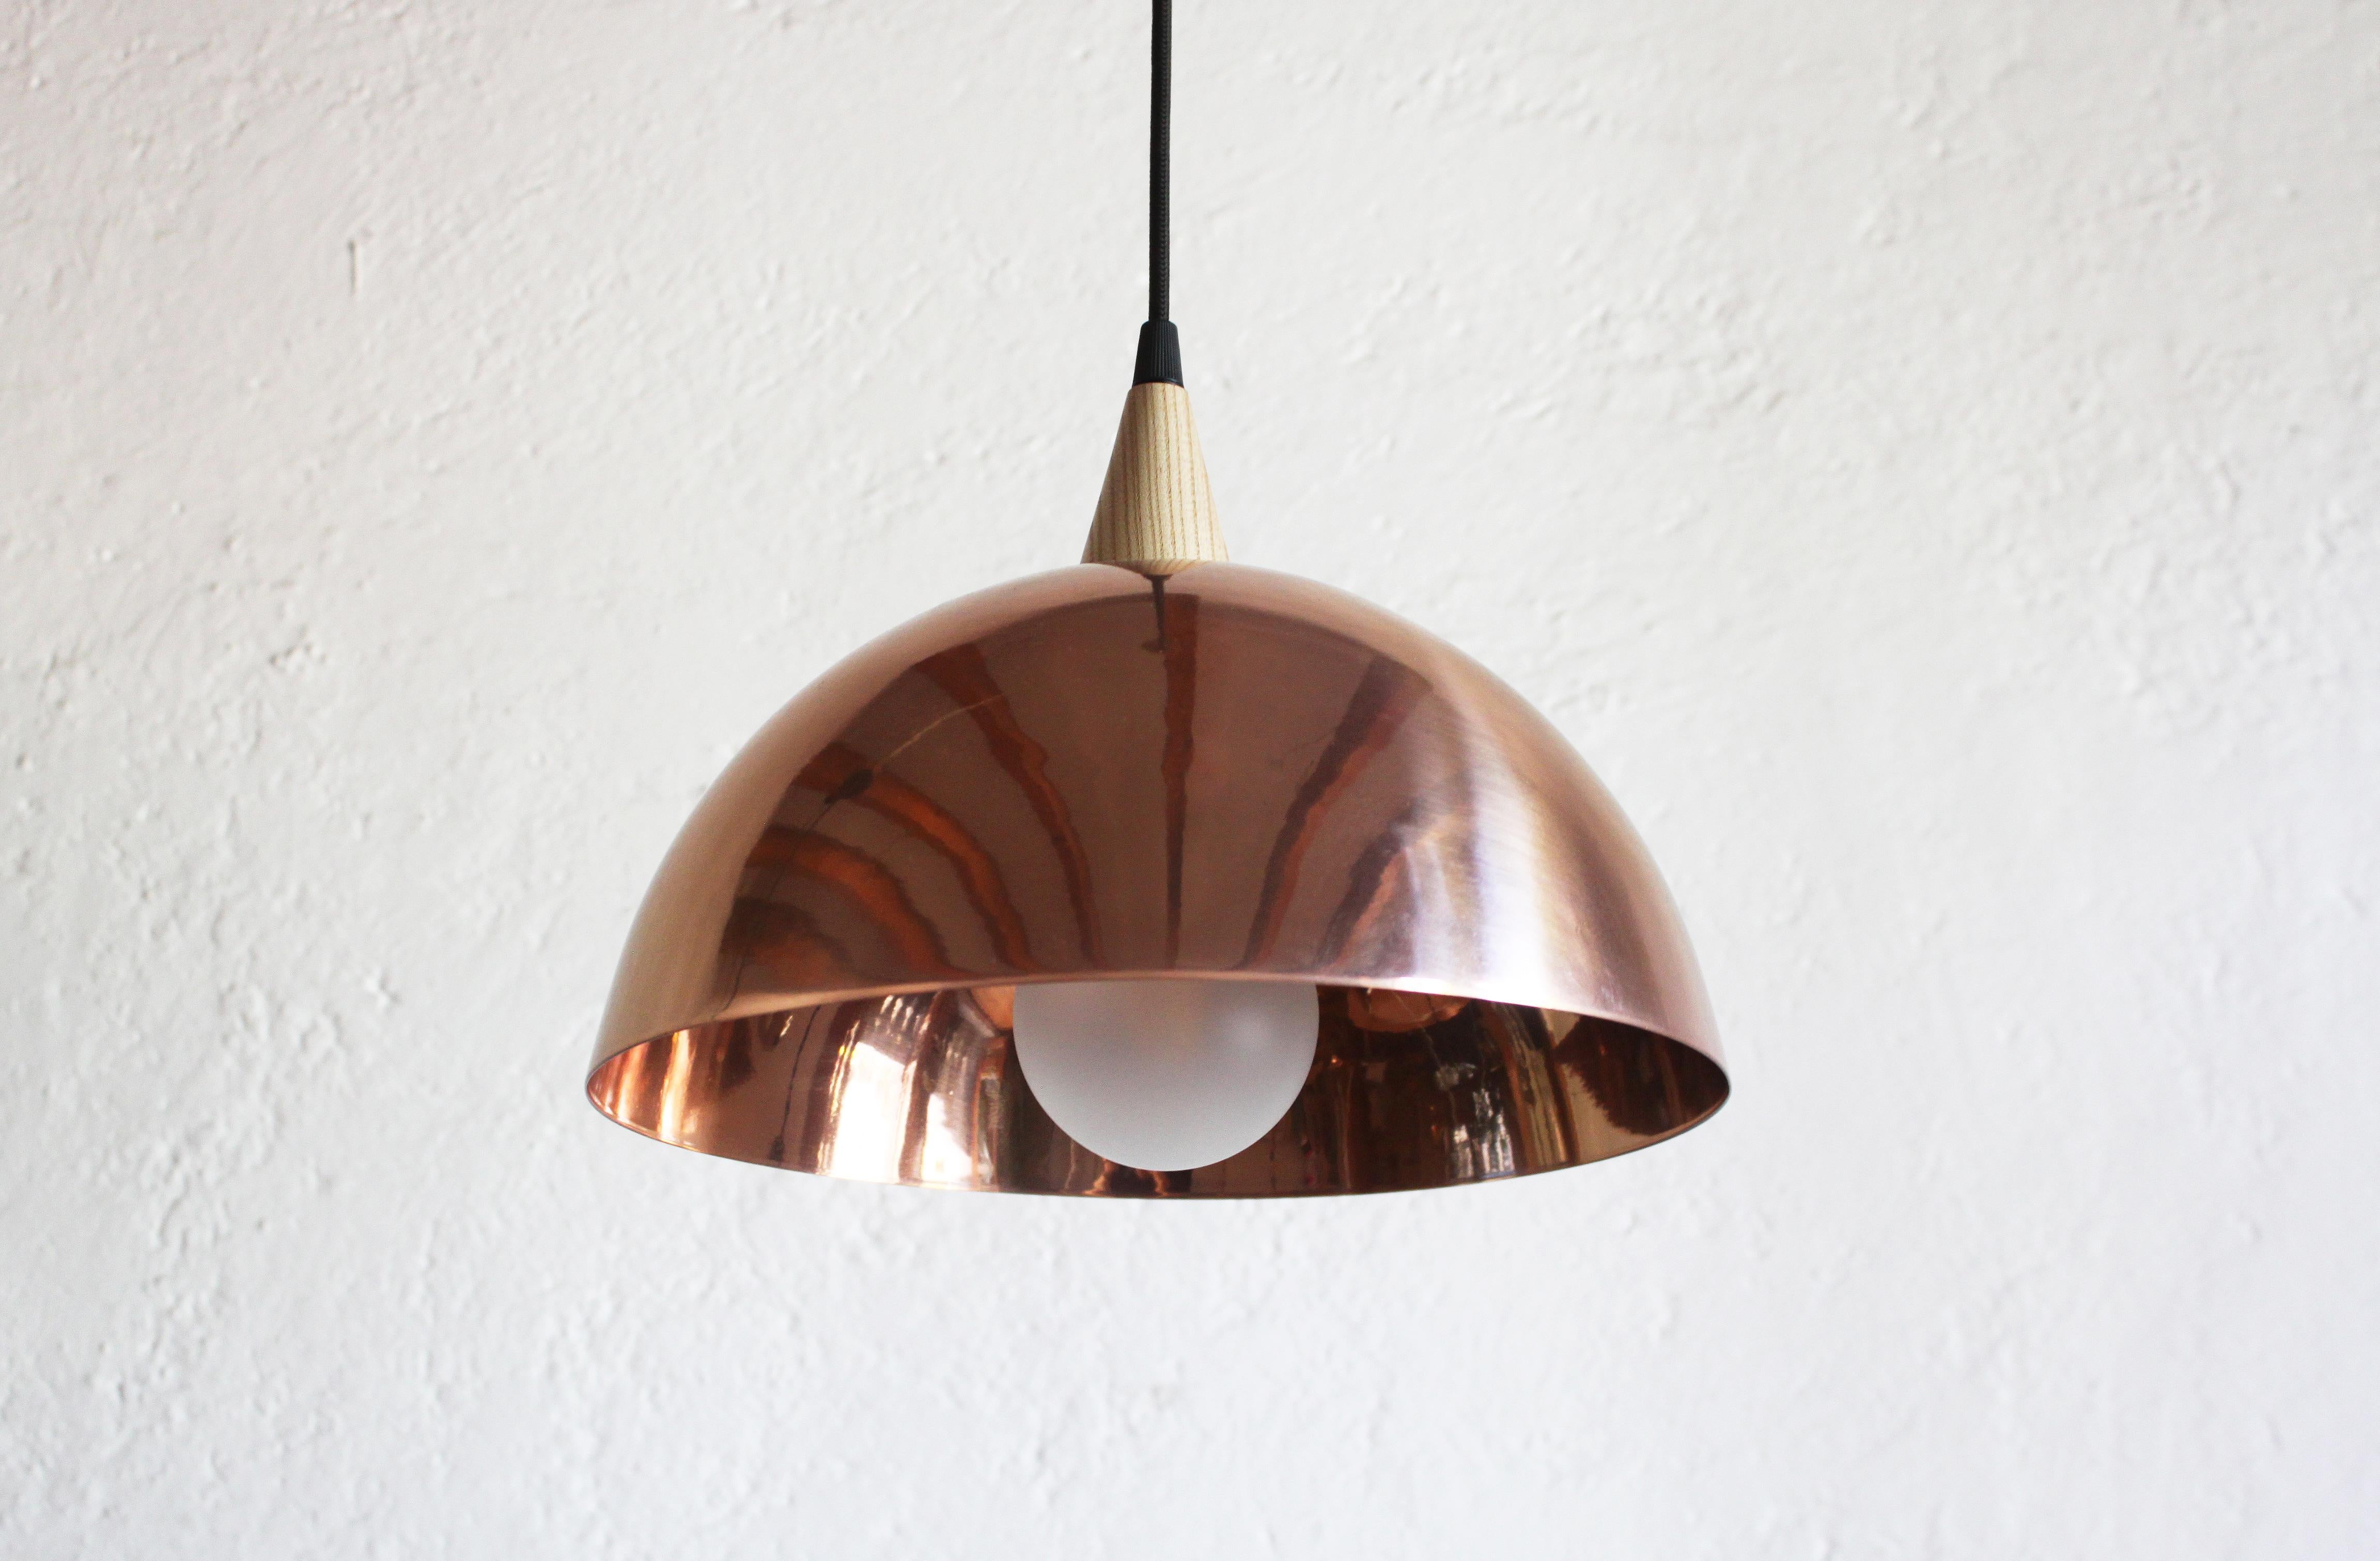 Mexican Domo Abajo 60 Pendant Lamp, Maria Beckmann, Represented by Tuleste Factory